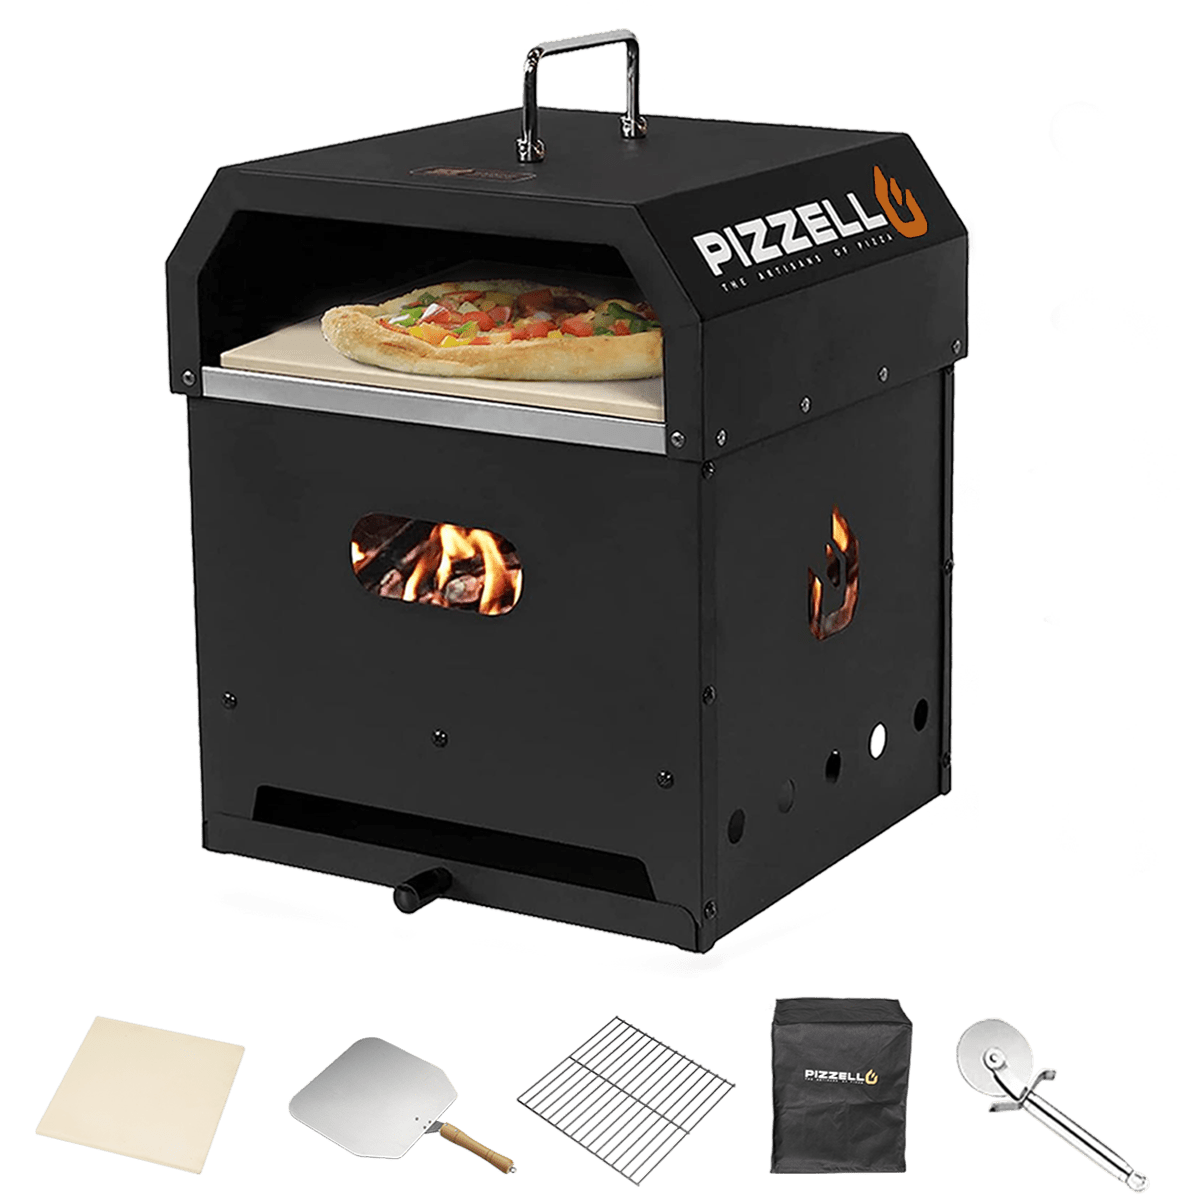 Pizzello Gusto - 4 in 1 Outdoor Pizza Oven - Pizzello#size_12-inch